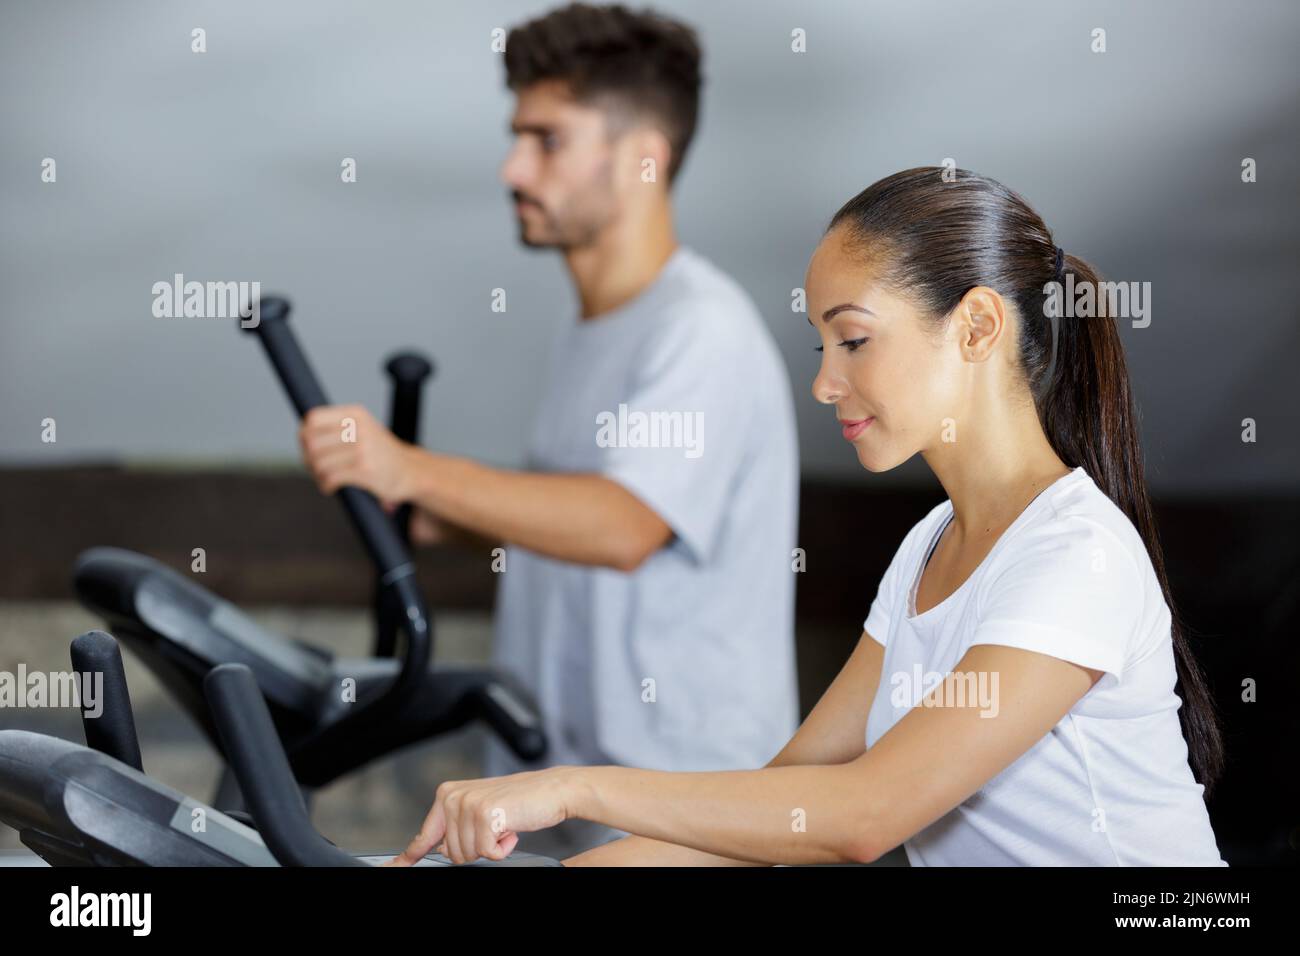 man and woman walking on treadmills in modern gym Stock Photo